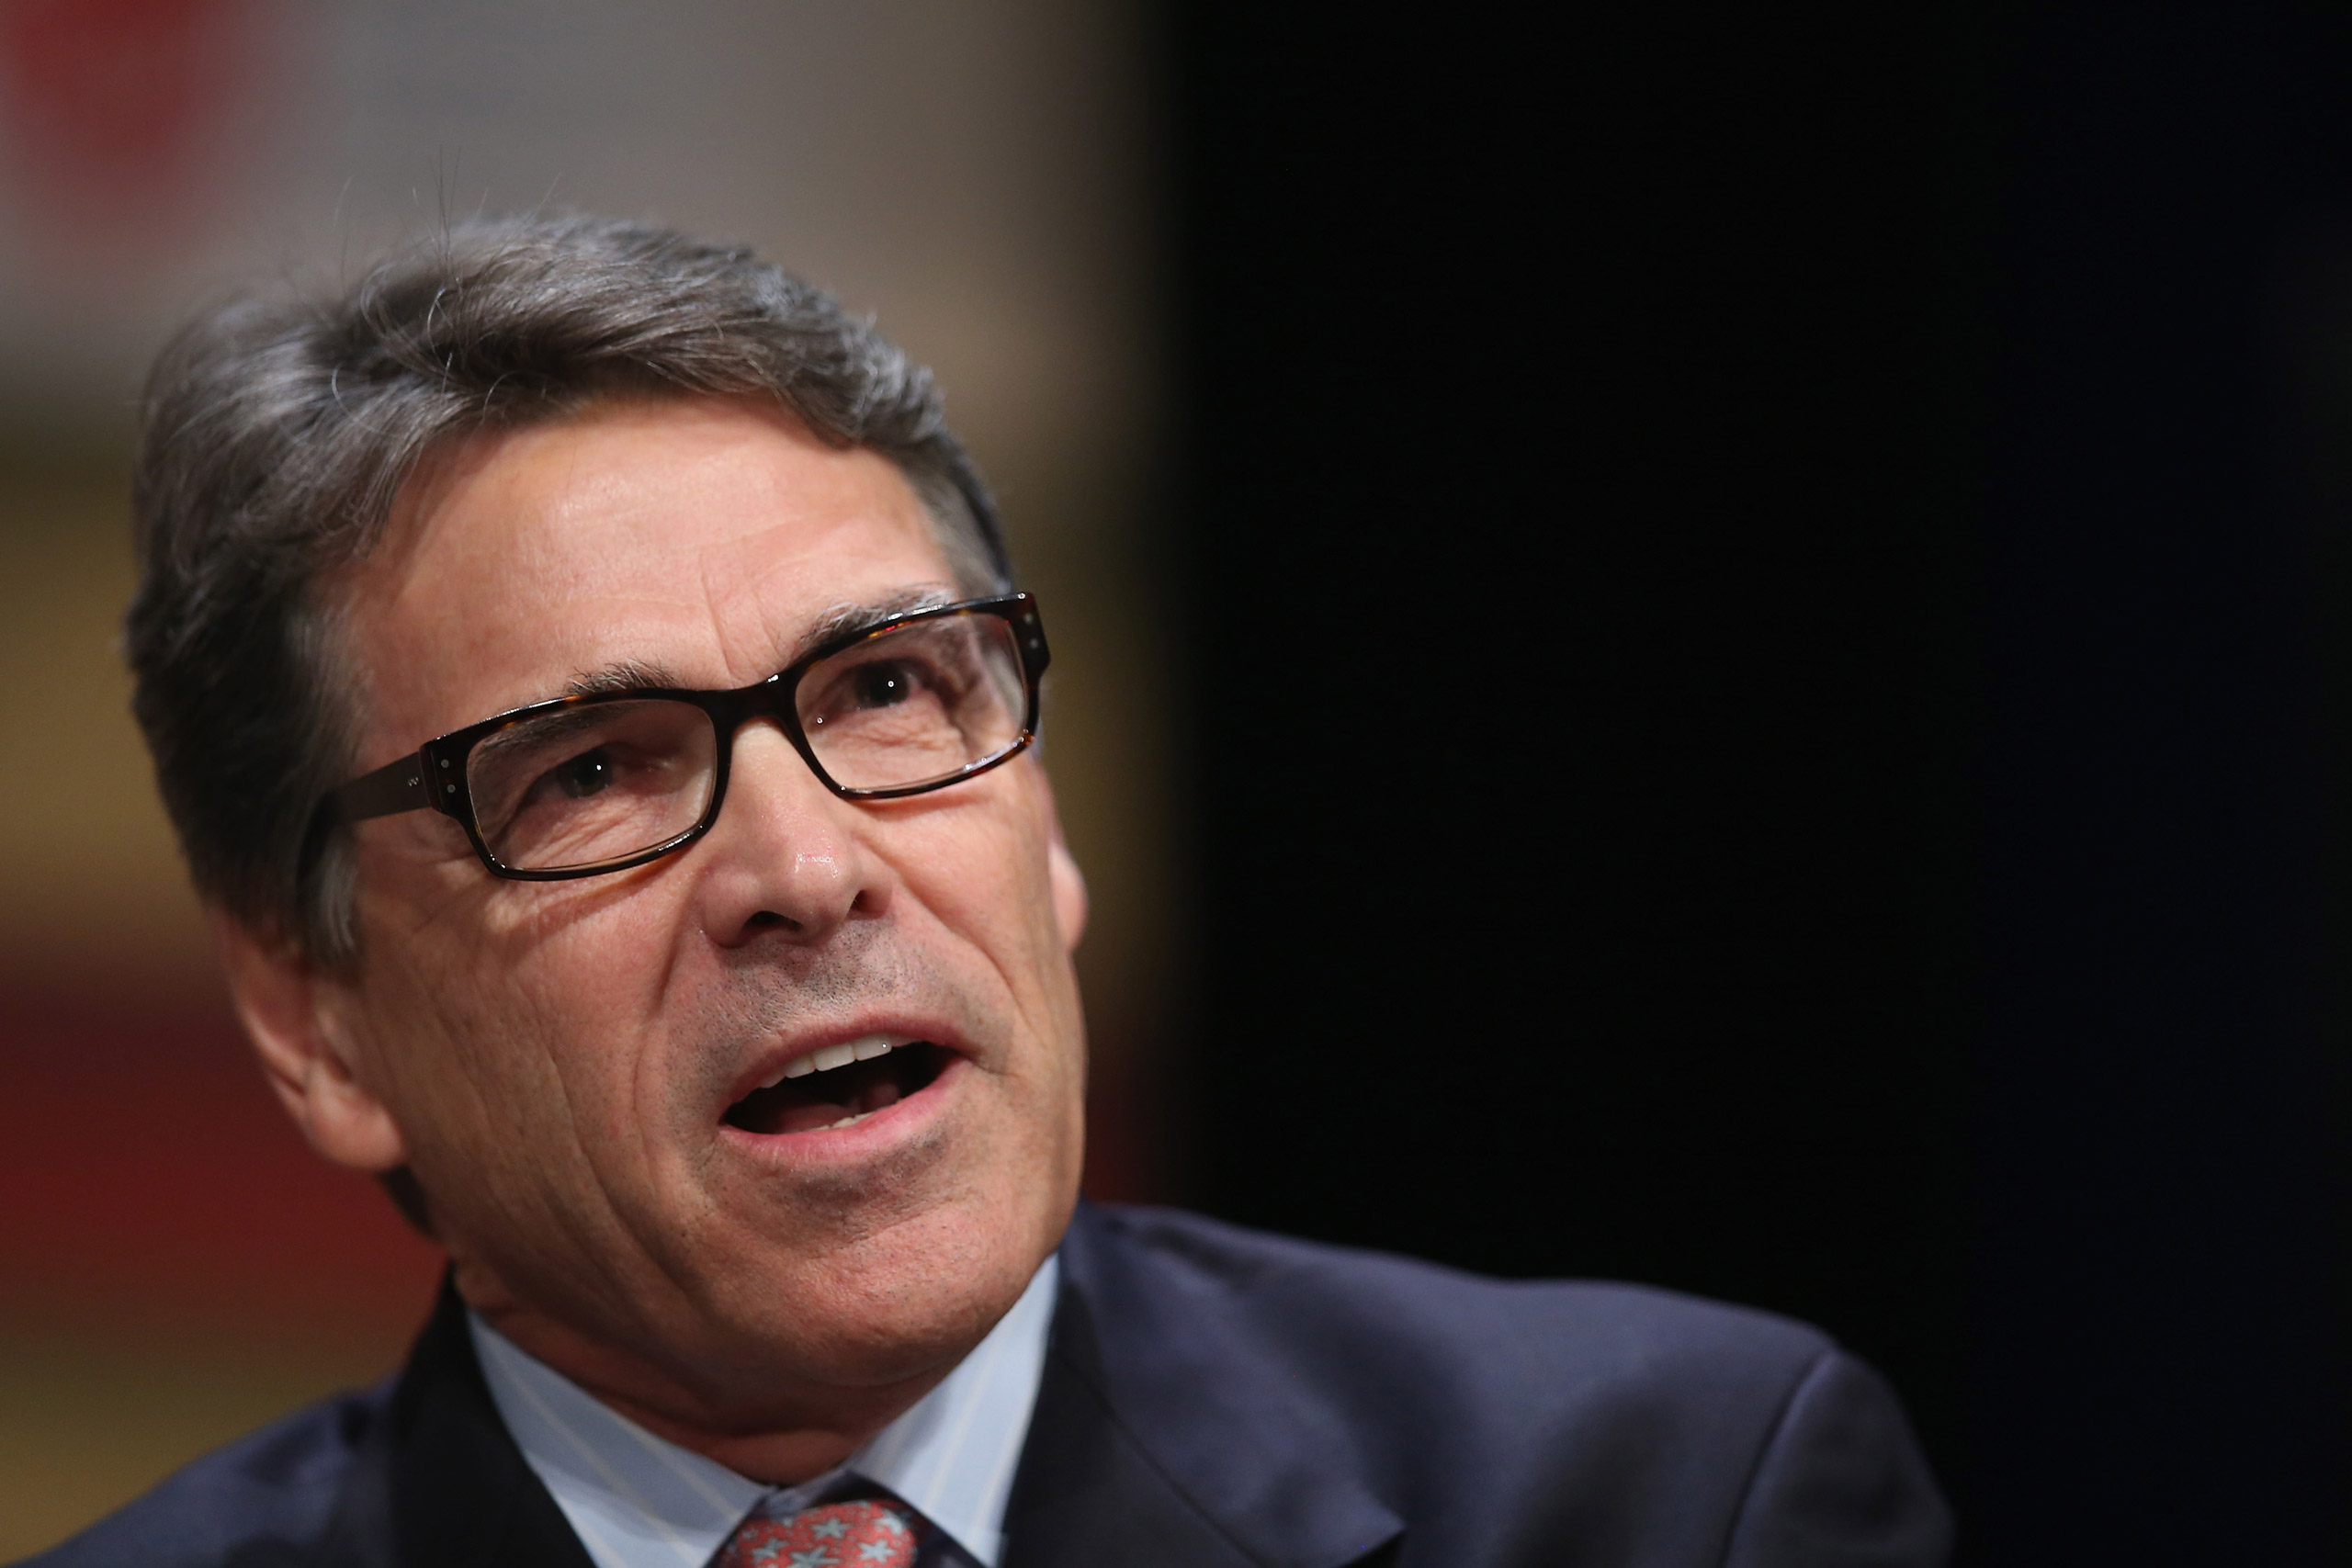 Former Texas Governor Rick Perry fields questions at The Family Leadership Summit at Stephens Auditorium in Ames, Iowa, on July 18, 2015. (Scott Olson—Getty Images)